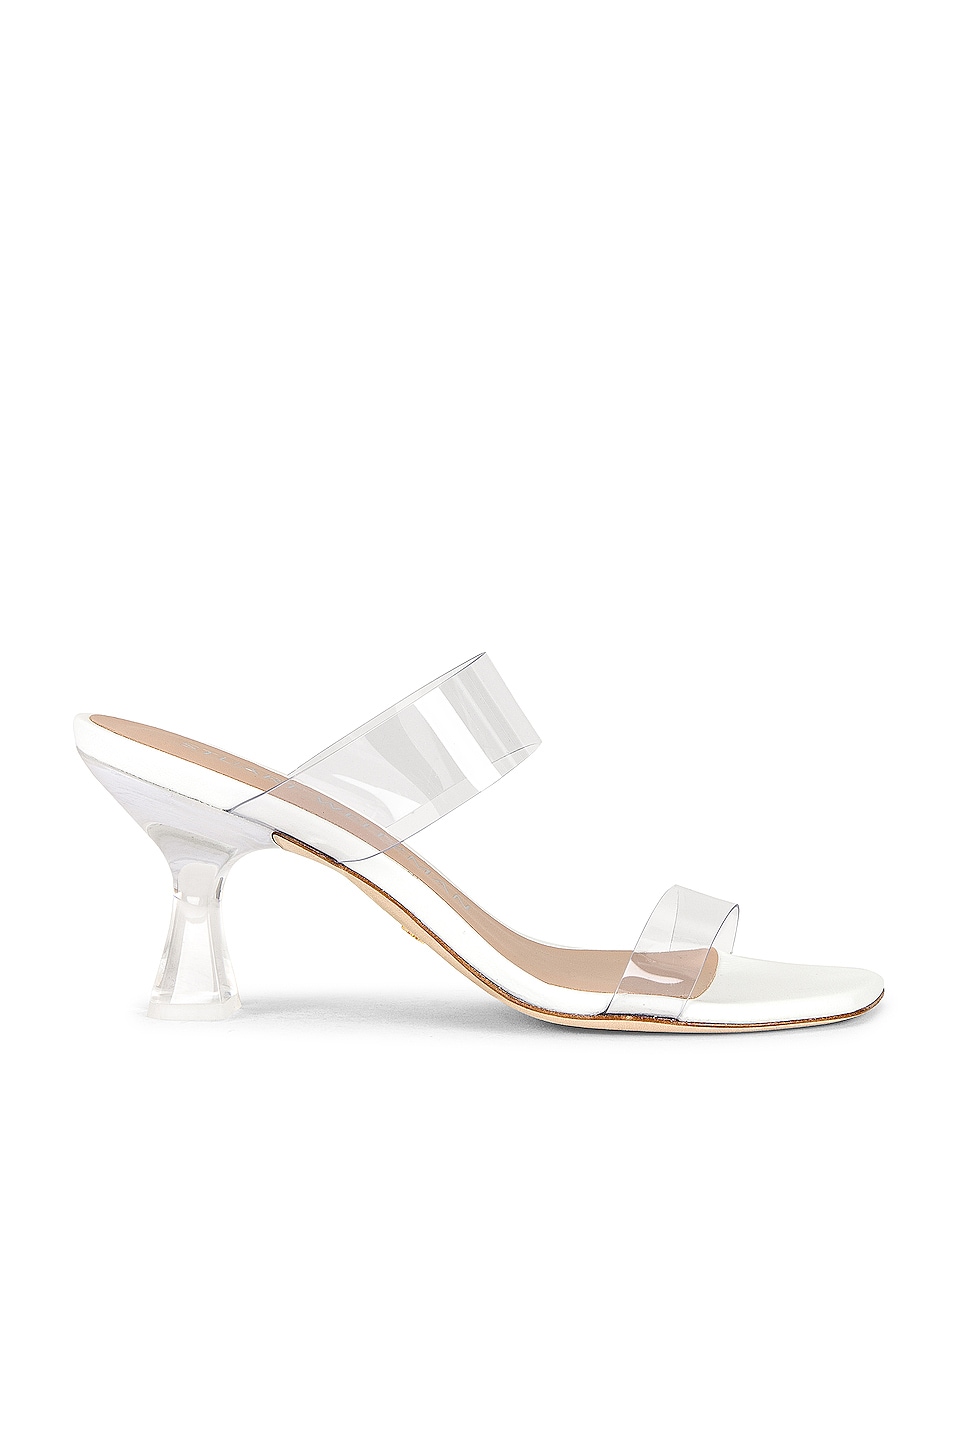 CLEAR HEELED MULES - TRANSPARENT: There are so many designer and high-street fashion brands with new heeled mules designs popping up all the time, but you actually don't have to go anywhere searching, because I have curated for you the hottest designs for this summer for all budgets.